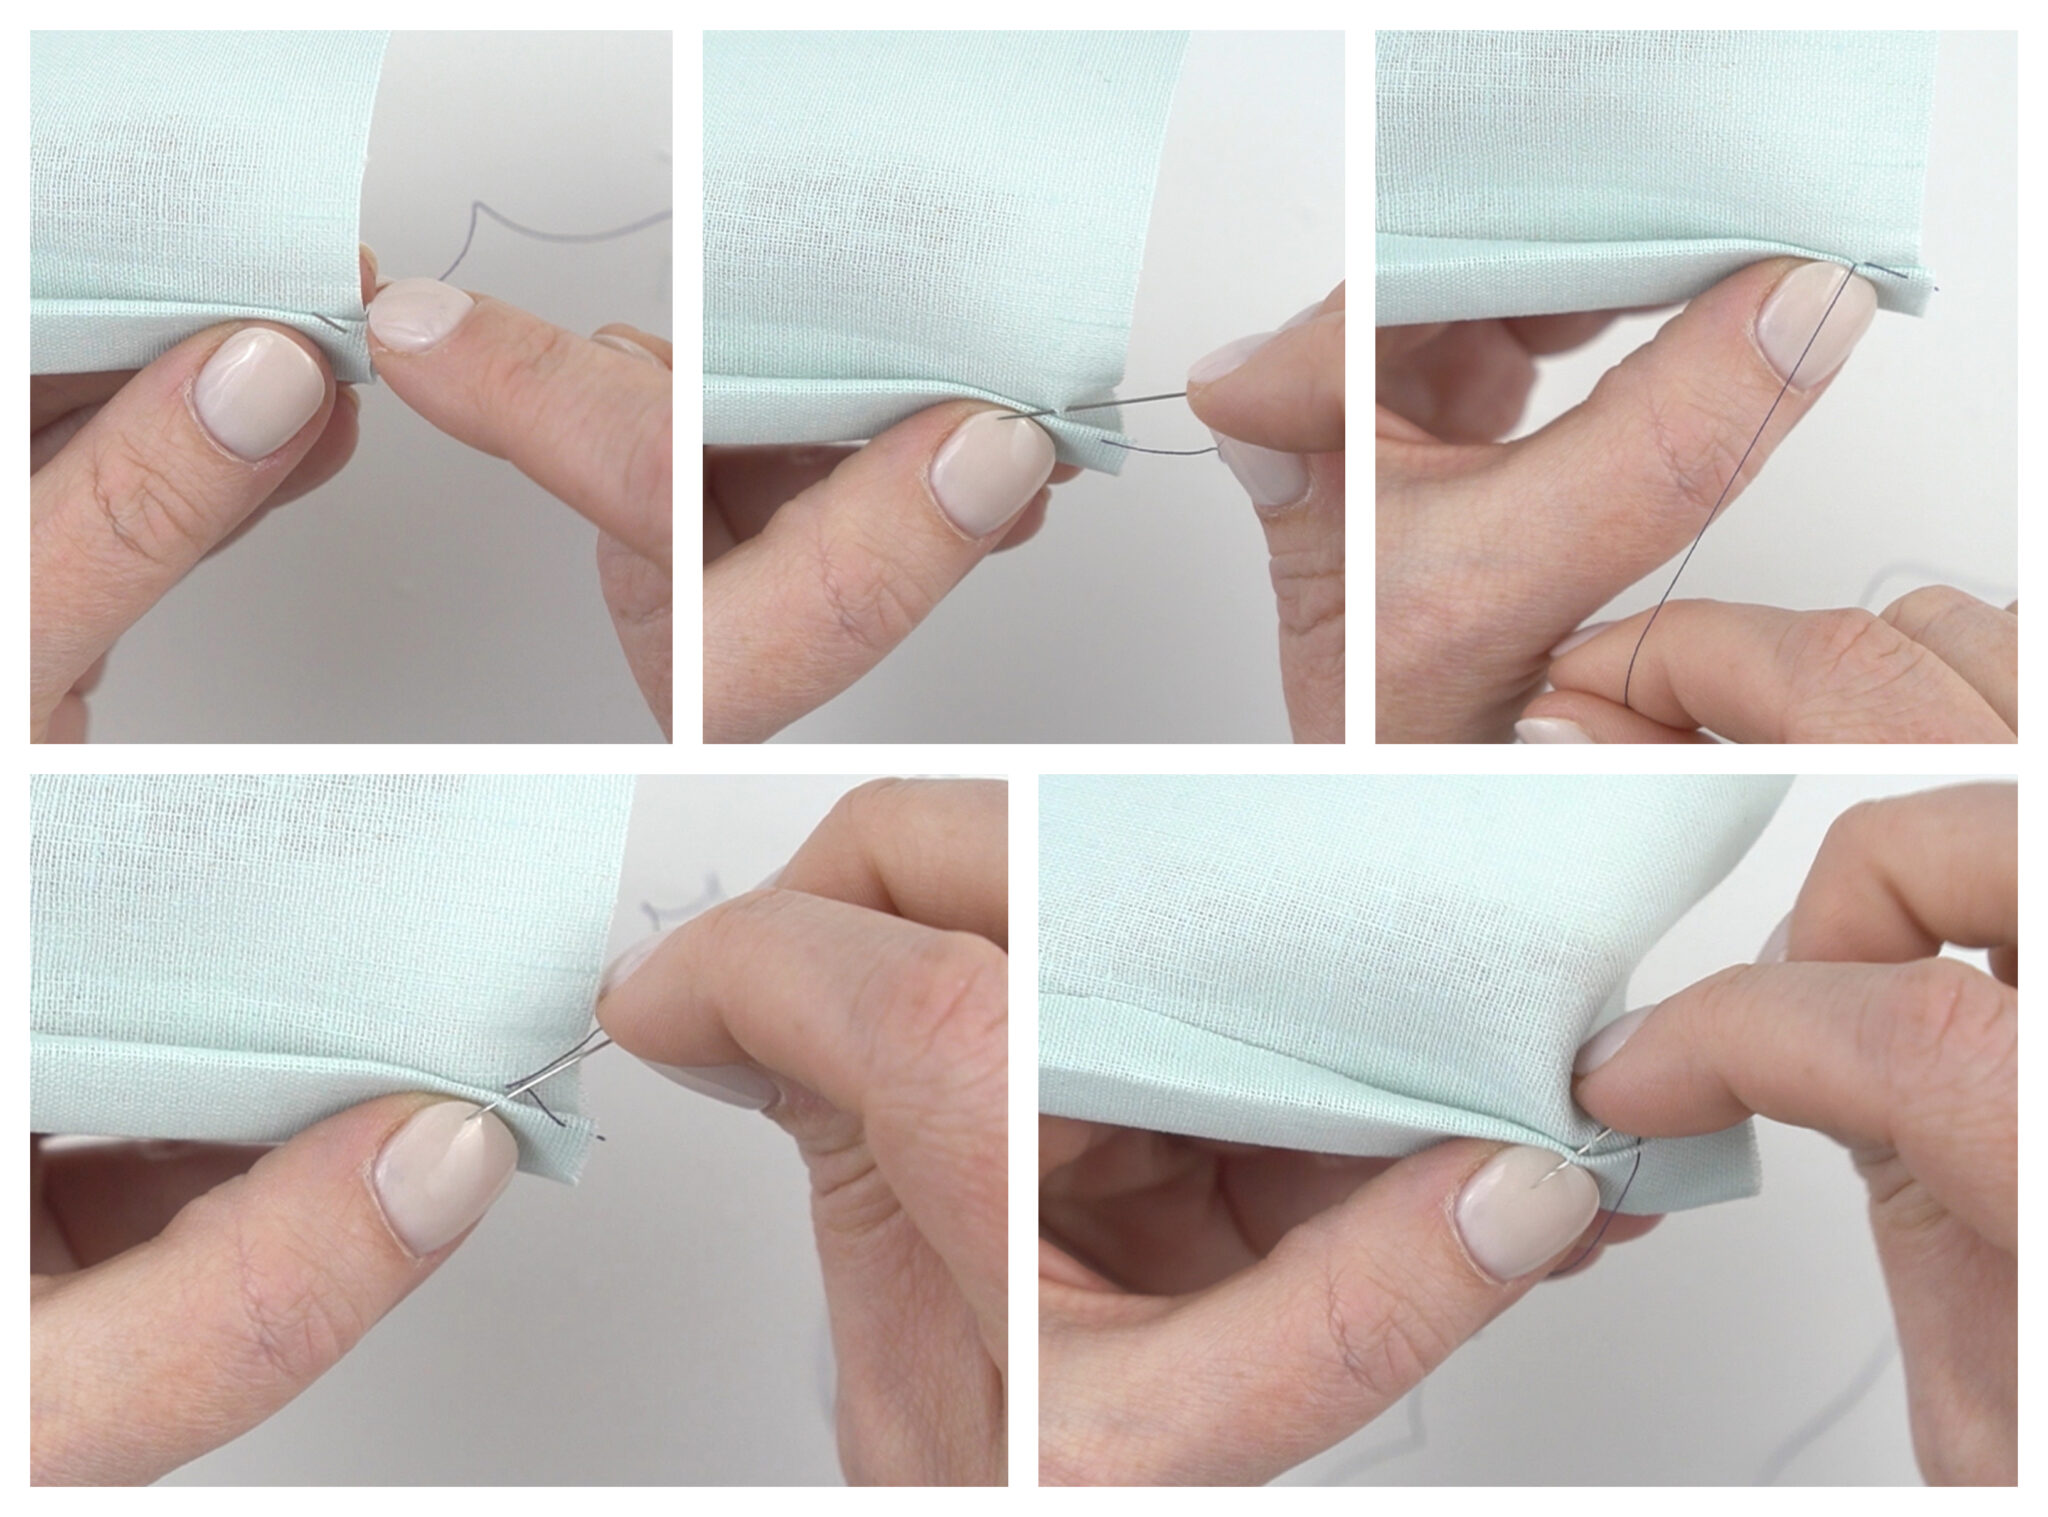 How to sew a whip stitch.